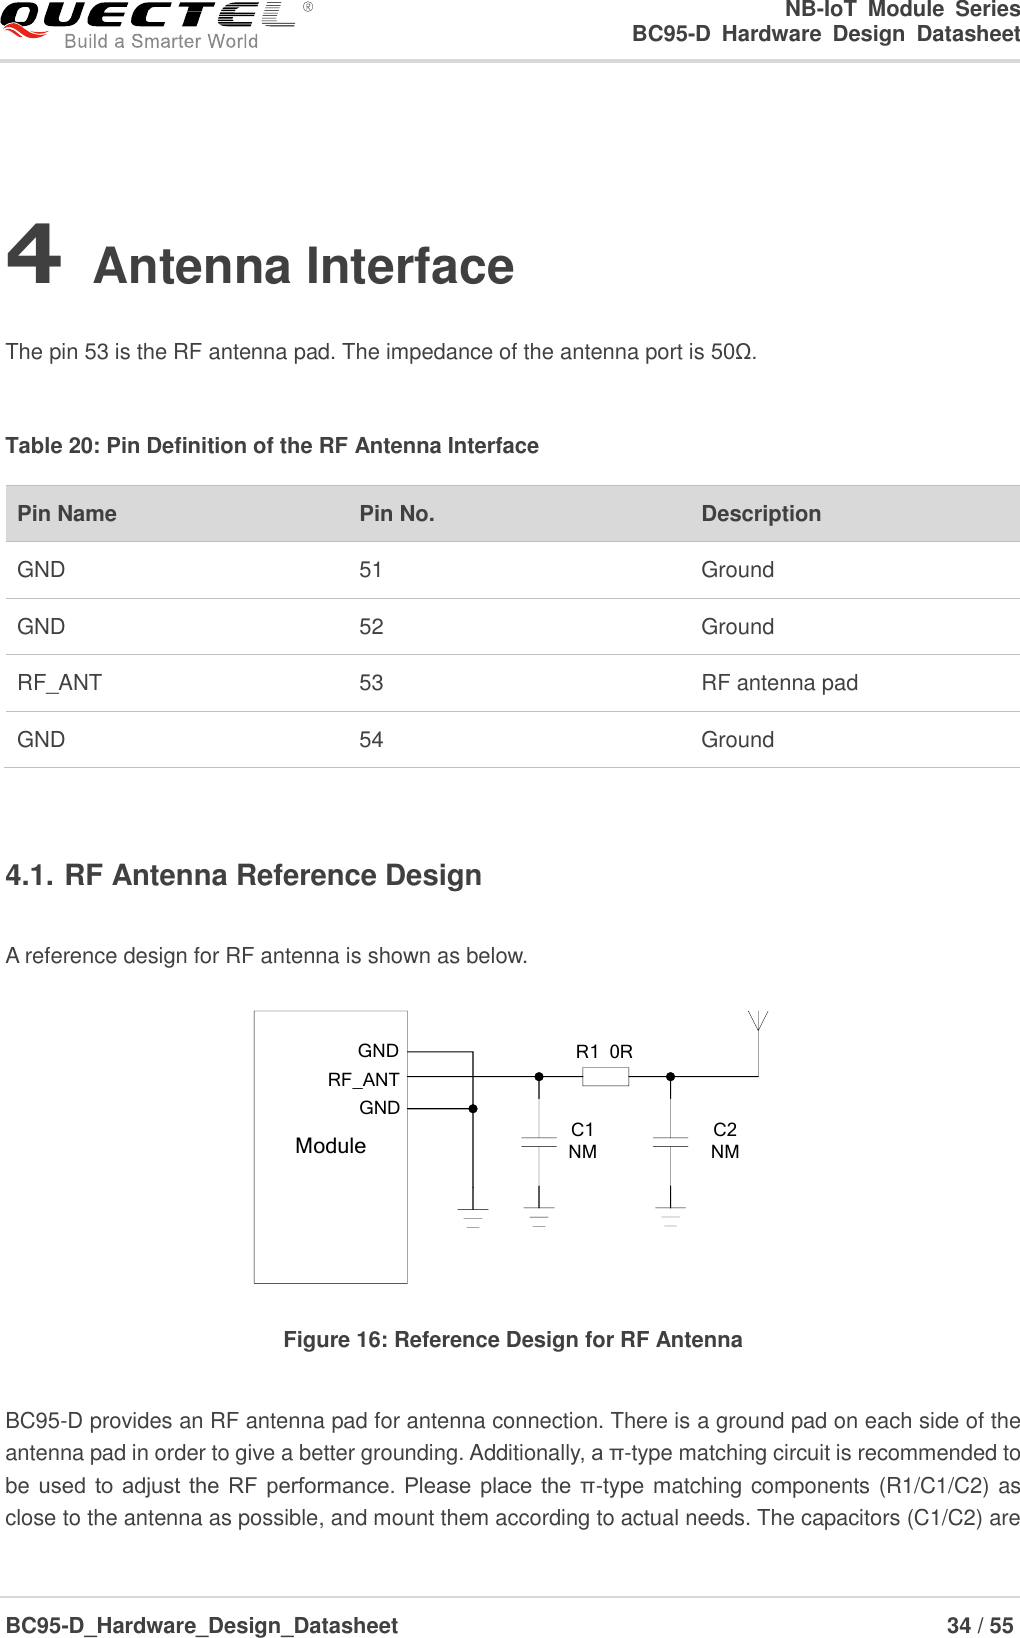                                                            NB-IoT  Module  Series                                                          BC95-D  Hardware  Design  Datasheet BC95-D_Hardware_Design_Datasheet                                                                    34 / 55    4 Antenna Interface  The pin 53 is the RF antenna pad. The impedance of the antenna port is 50Ω.    Table 20: Pin Definition of the RF Antenna Interface  4.1. RF Antenna Reference Design  A reference design for RF antenna is shown as below. ModuleRF_ANTR1  0RC1 NMC2 NMGNDGND Figure 16: Reference Design for RF Antenna  BC95-D provides an RF antenna pad for antenna connection. There is a ground pad on each side of the antenna pad in order to give a better grounding. Additionally, a π-type matching circuit is recommended to be used  to adjust  the  RF performance. Please  place  the  π-type matching components (R1/C1/C2) as close to the antenna as possible, and mount them according to actual needs. The capacitors (C1/C2) are Pin Name   Pin No. Description GND 51 Ground GND 52 Ground RF_ANT 53 RF antenna pad GND 54 Ground 